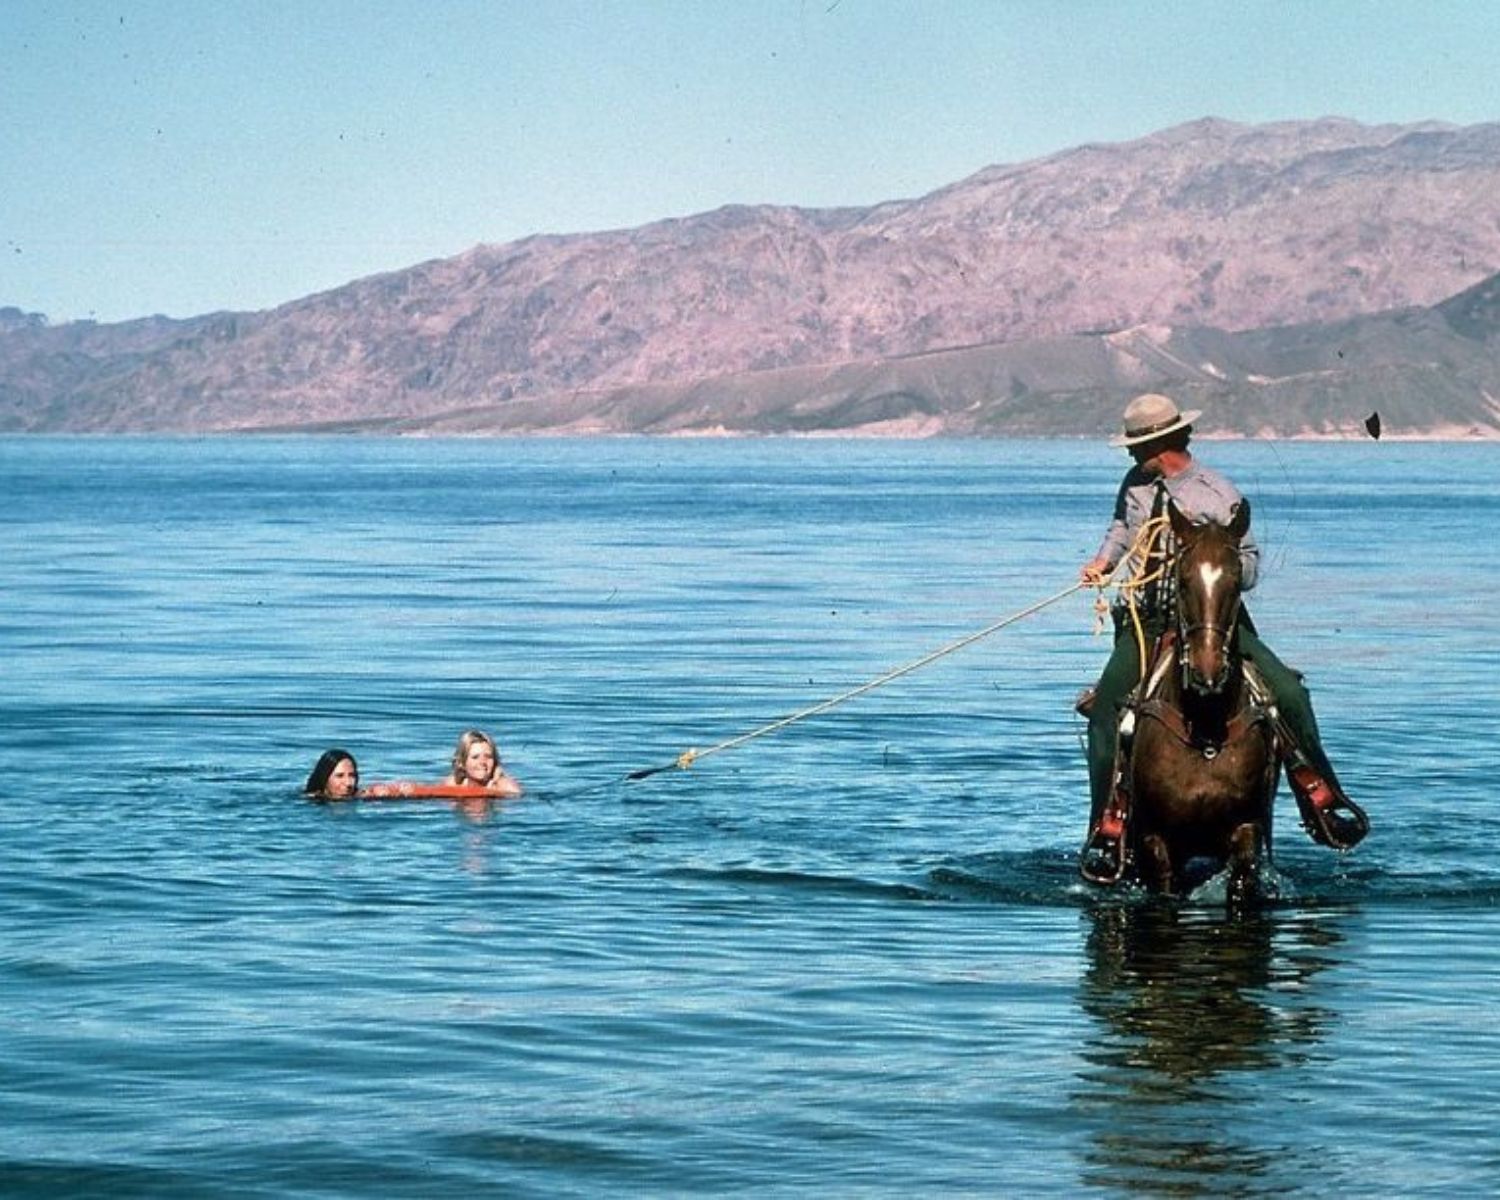 A Park Ranger on horseback lassos a personal watercraft used by two young girls in a desert lake.